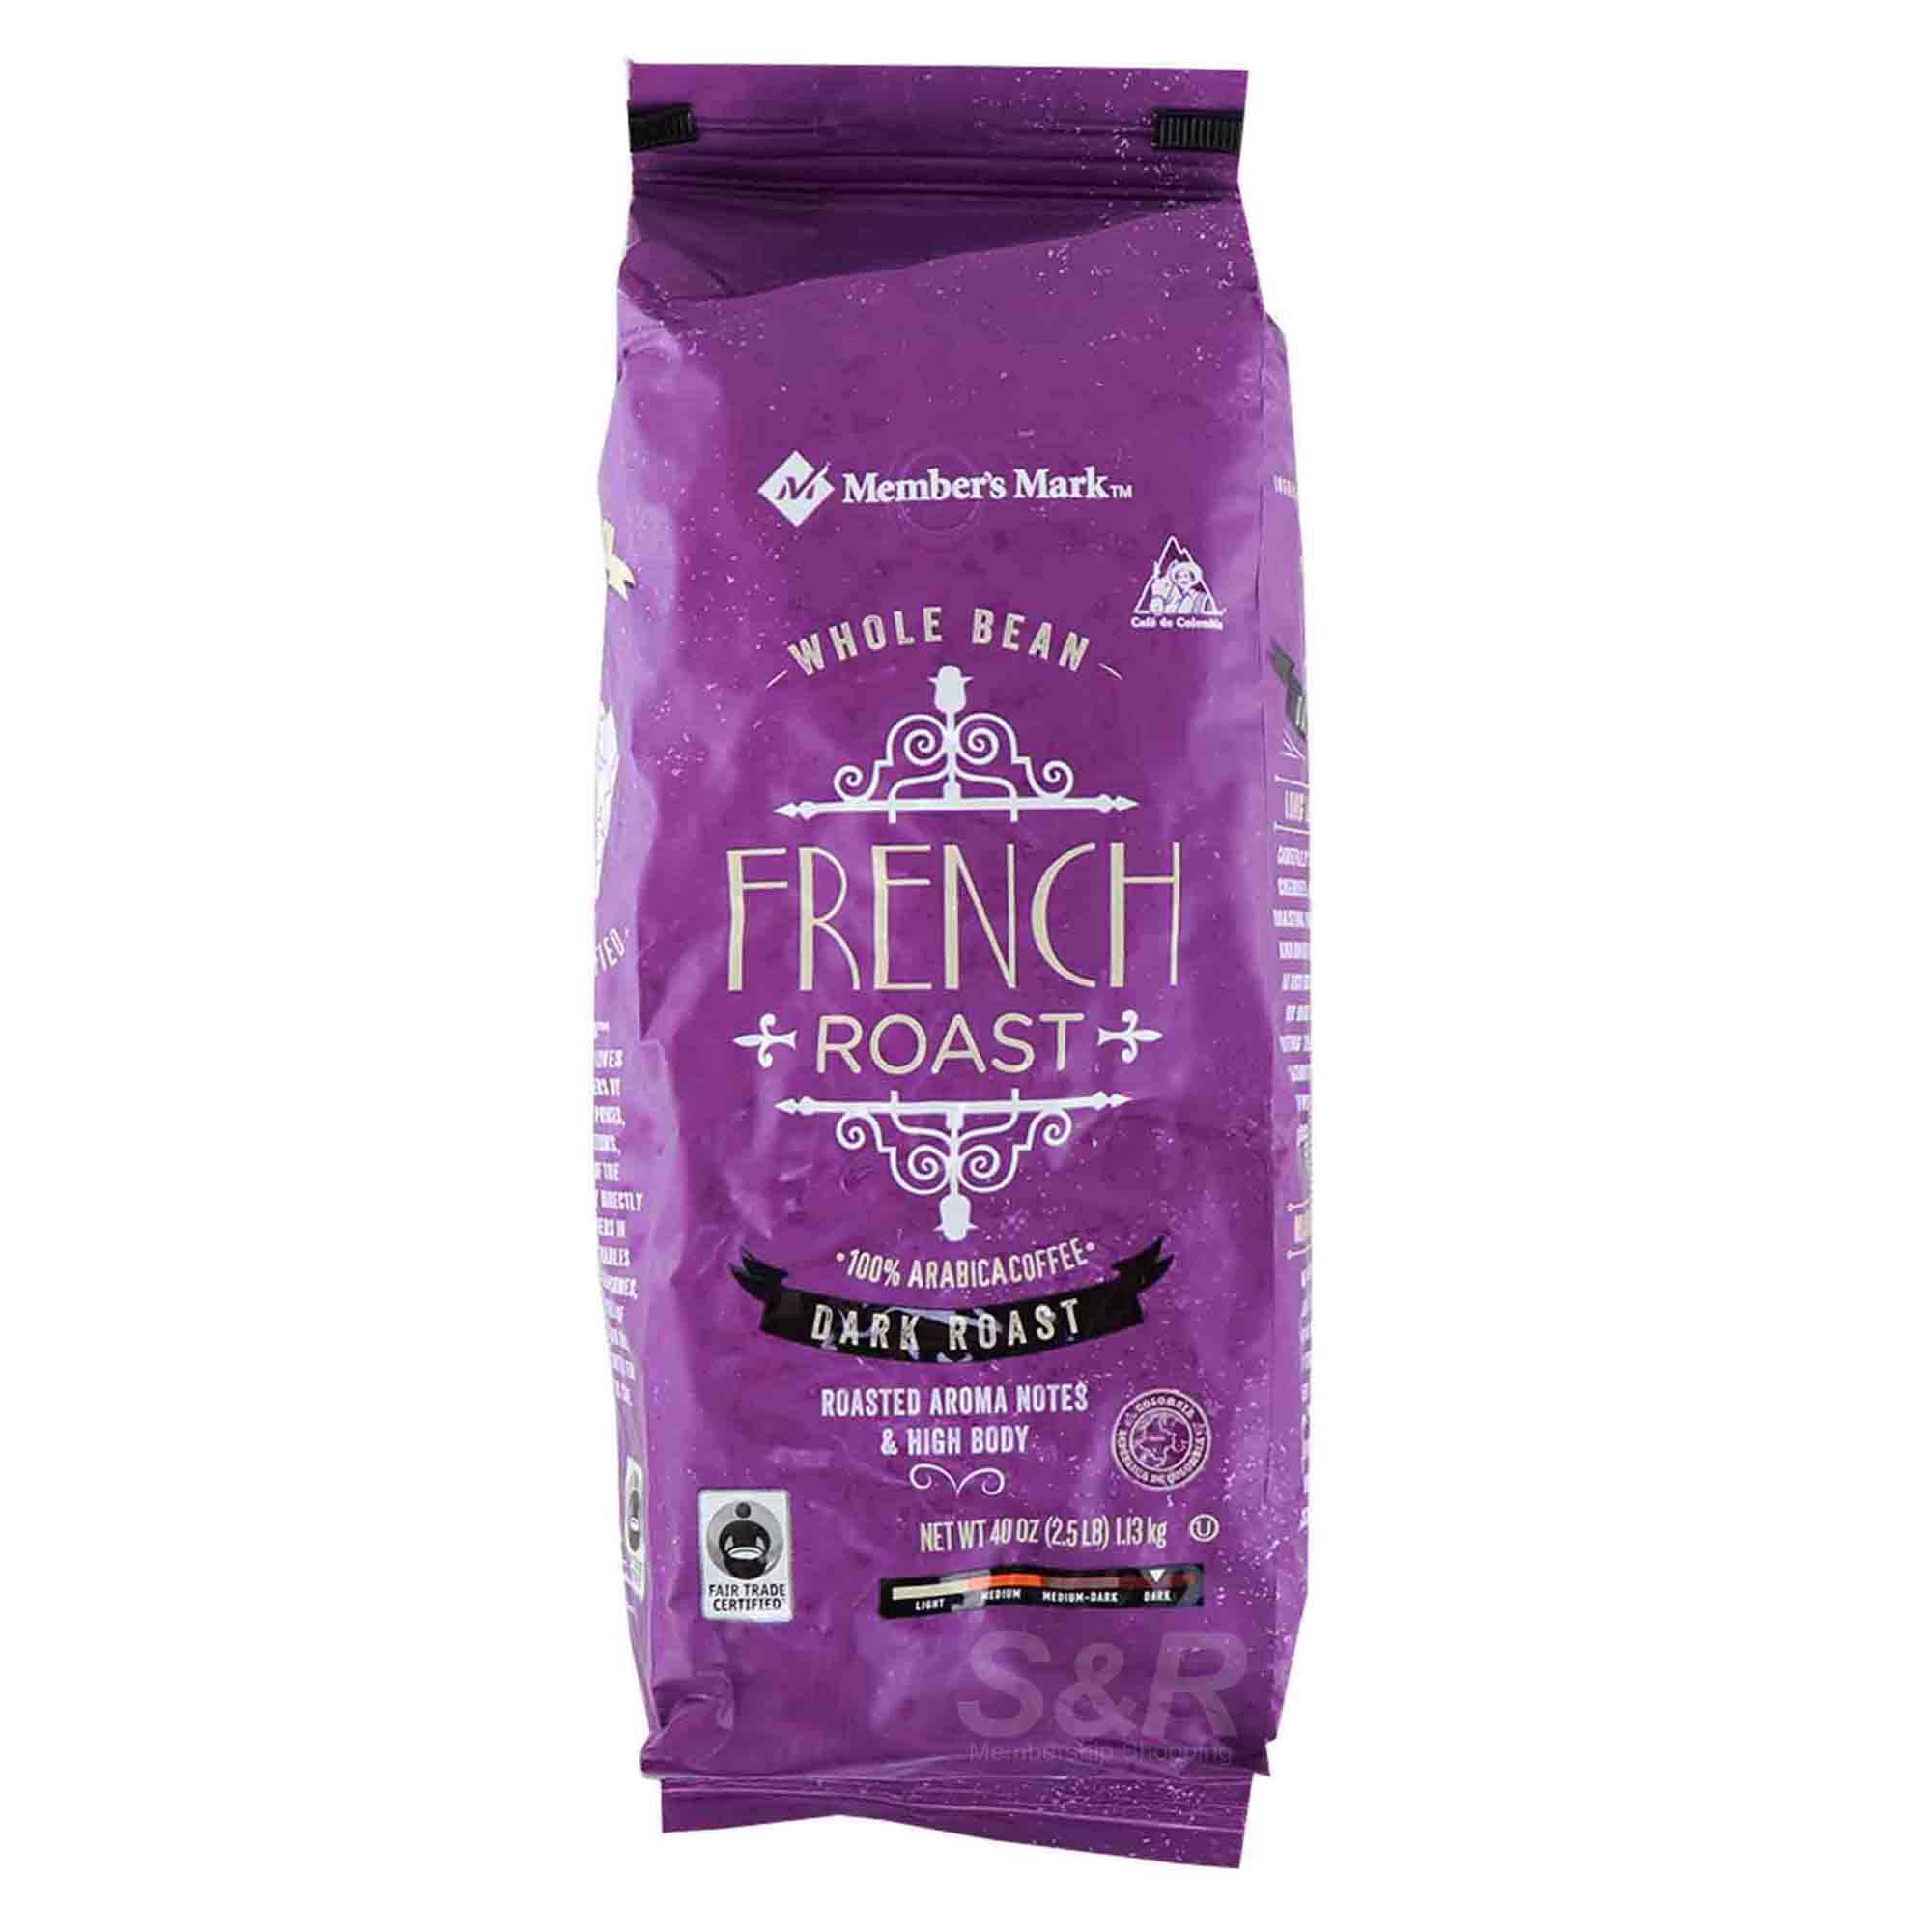 Member’s Mark Whole Bean French Roast Coffee 1.13kg